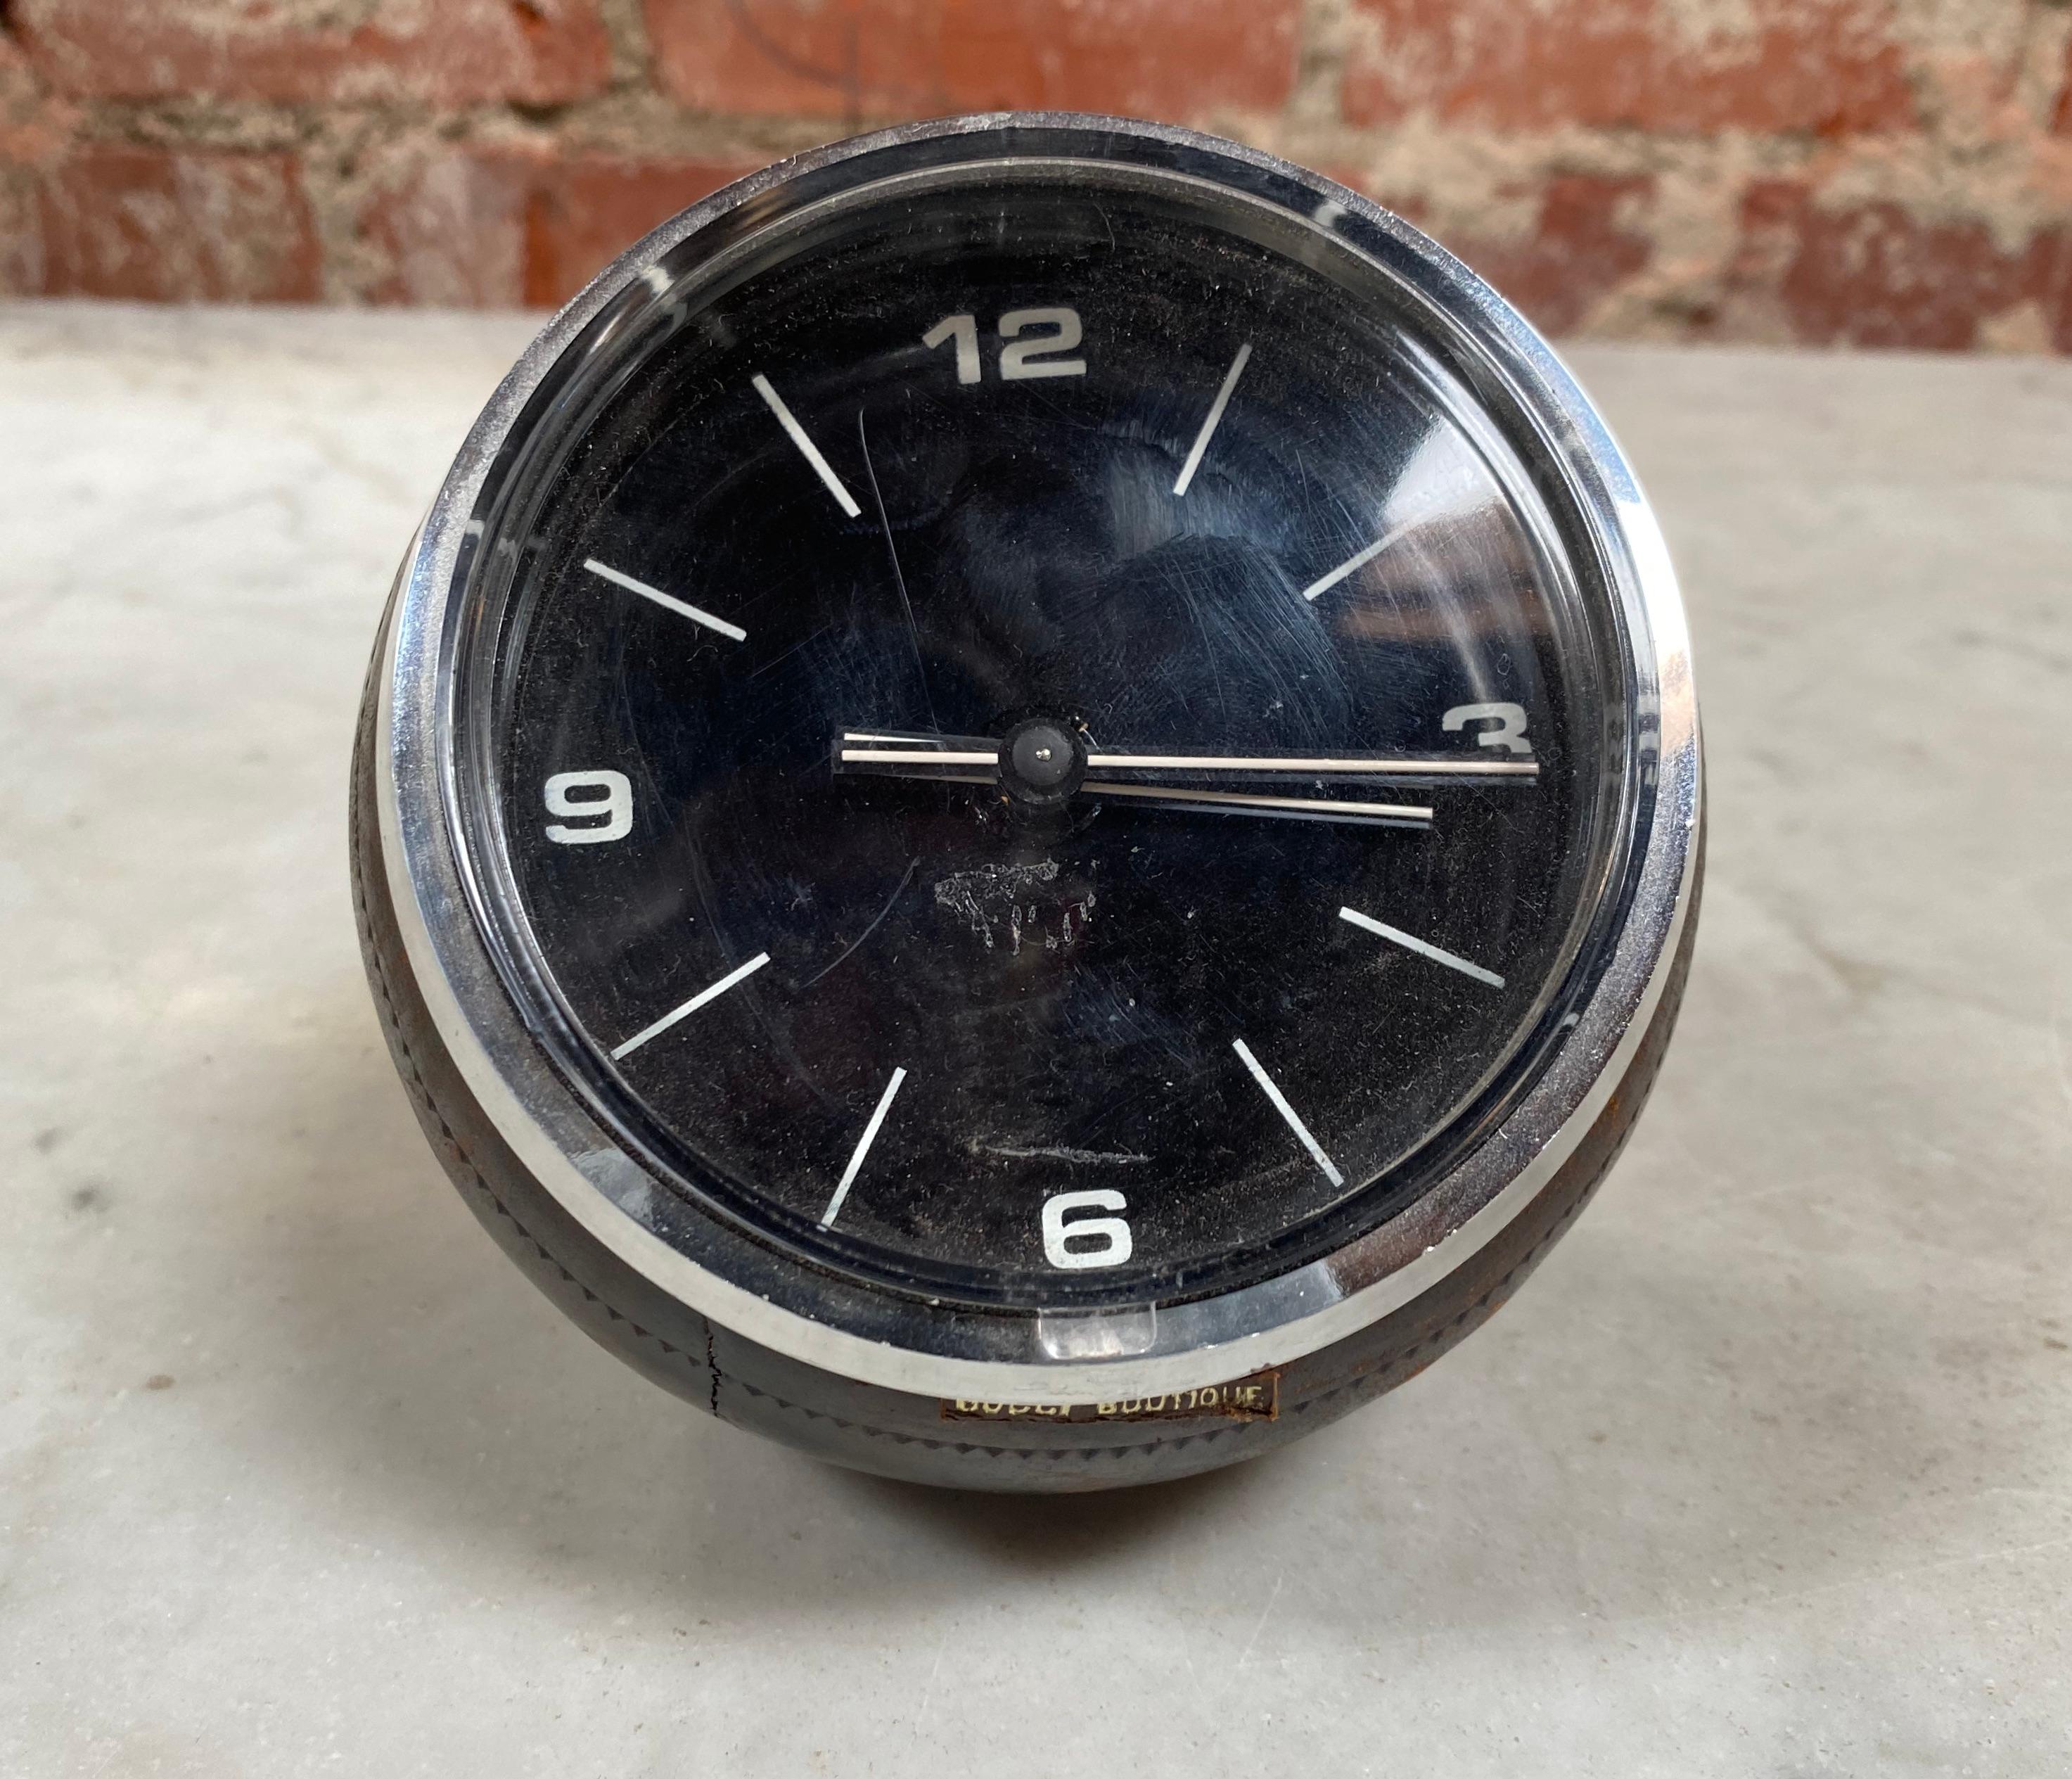 Beautiful vintage Italian Gucci table clock signed at the bottom with a unique design and shape.